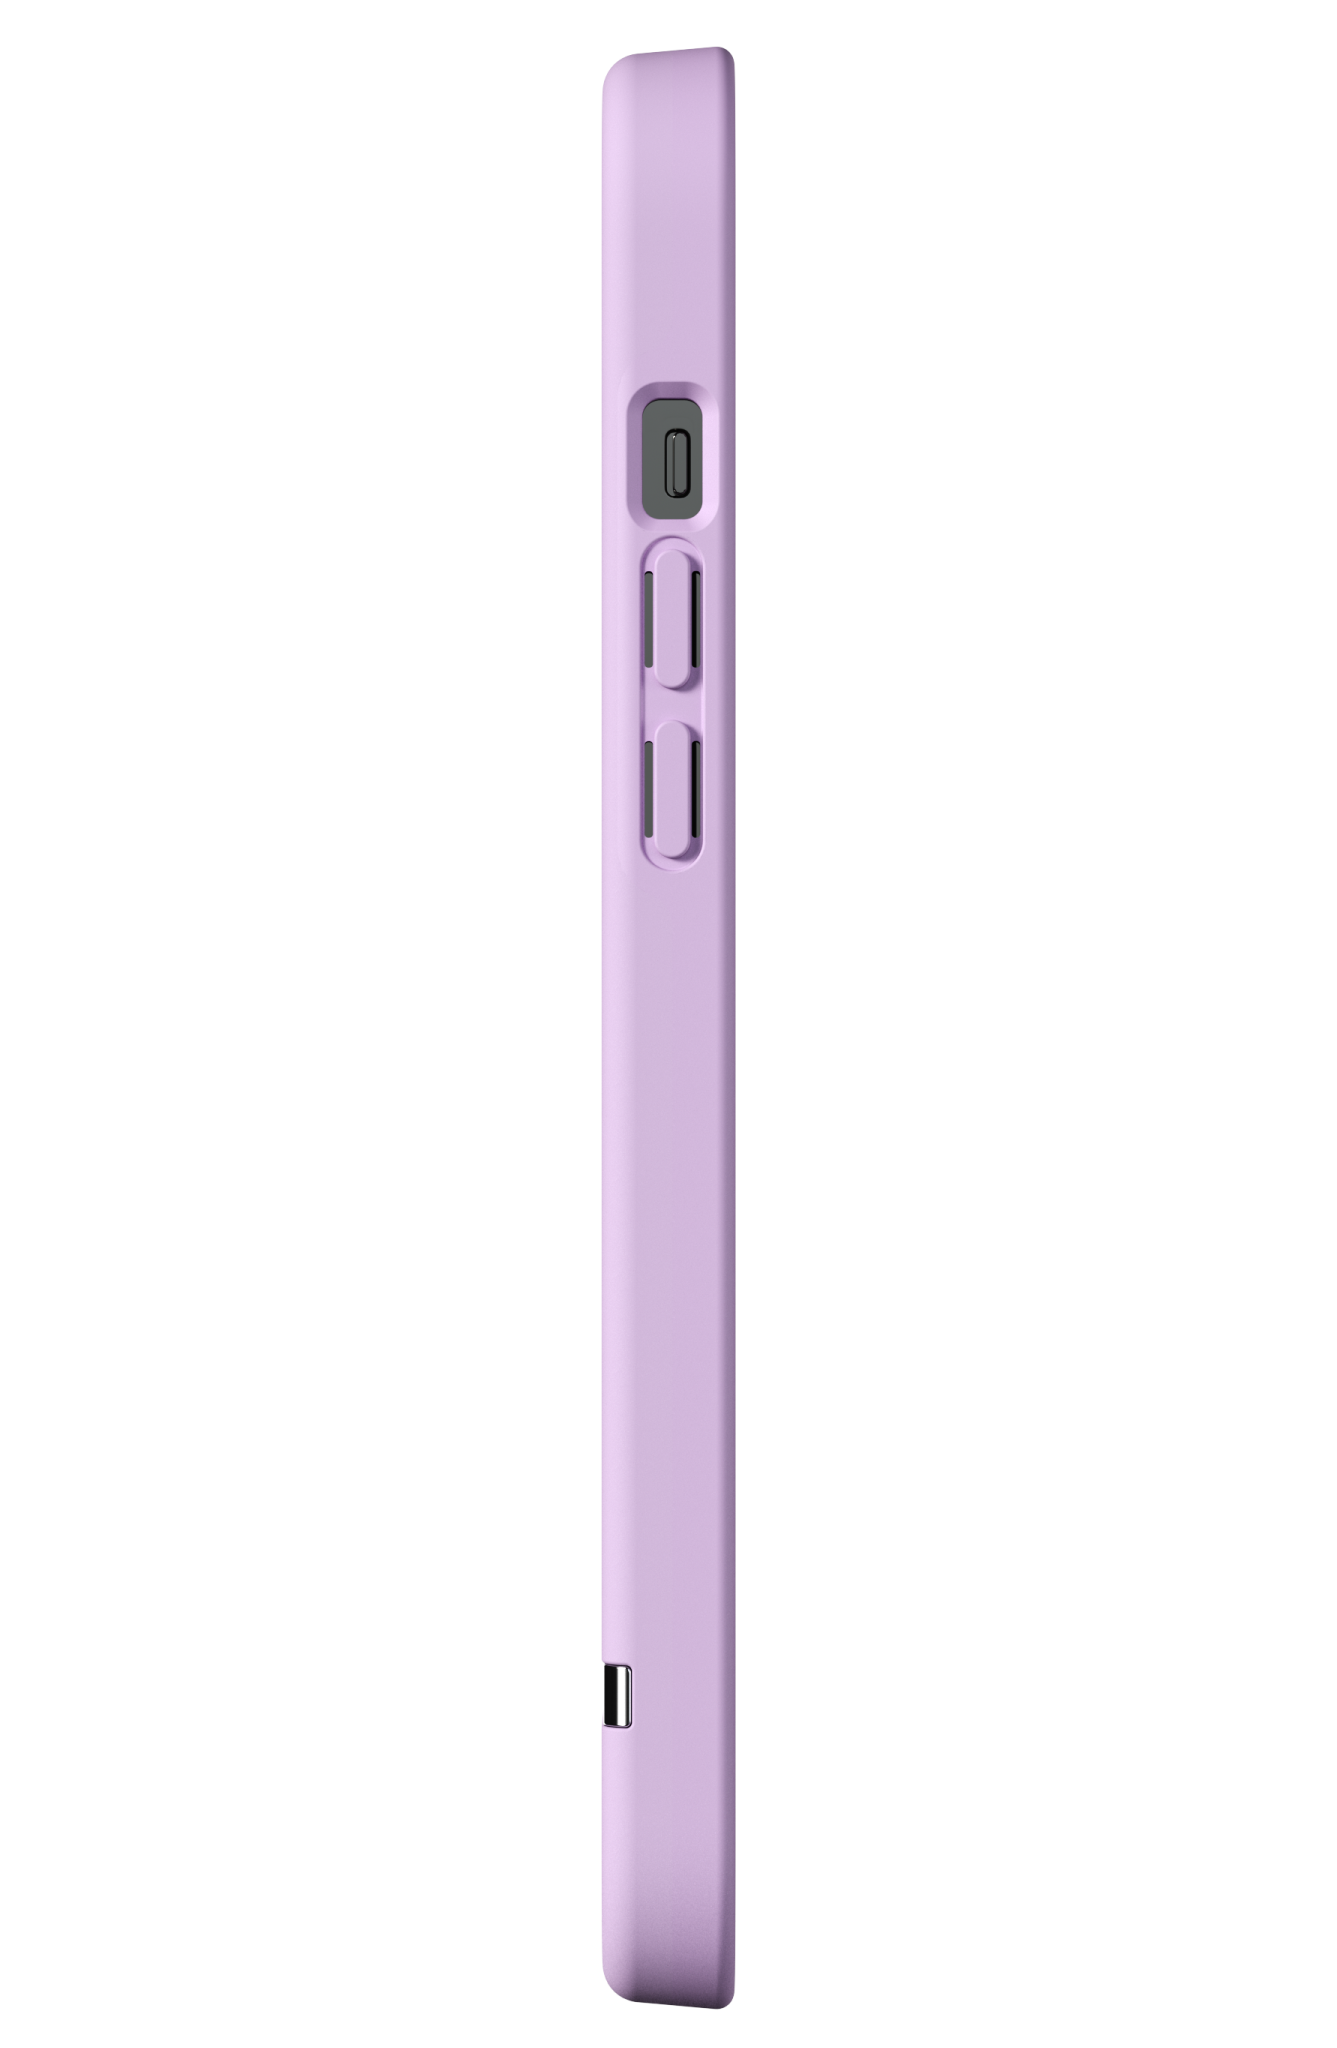 iPhone Soft Lilac Case